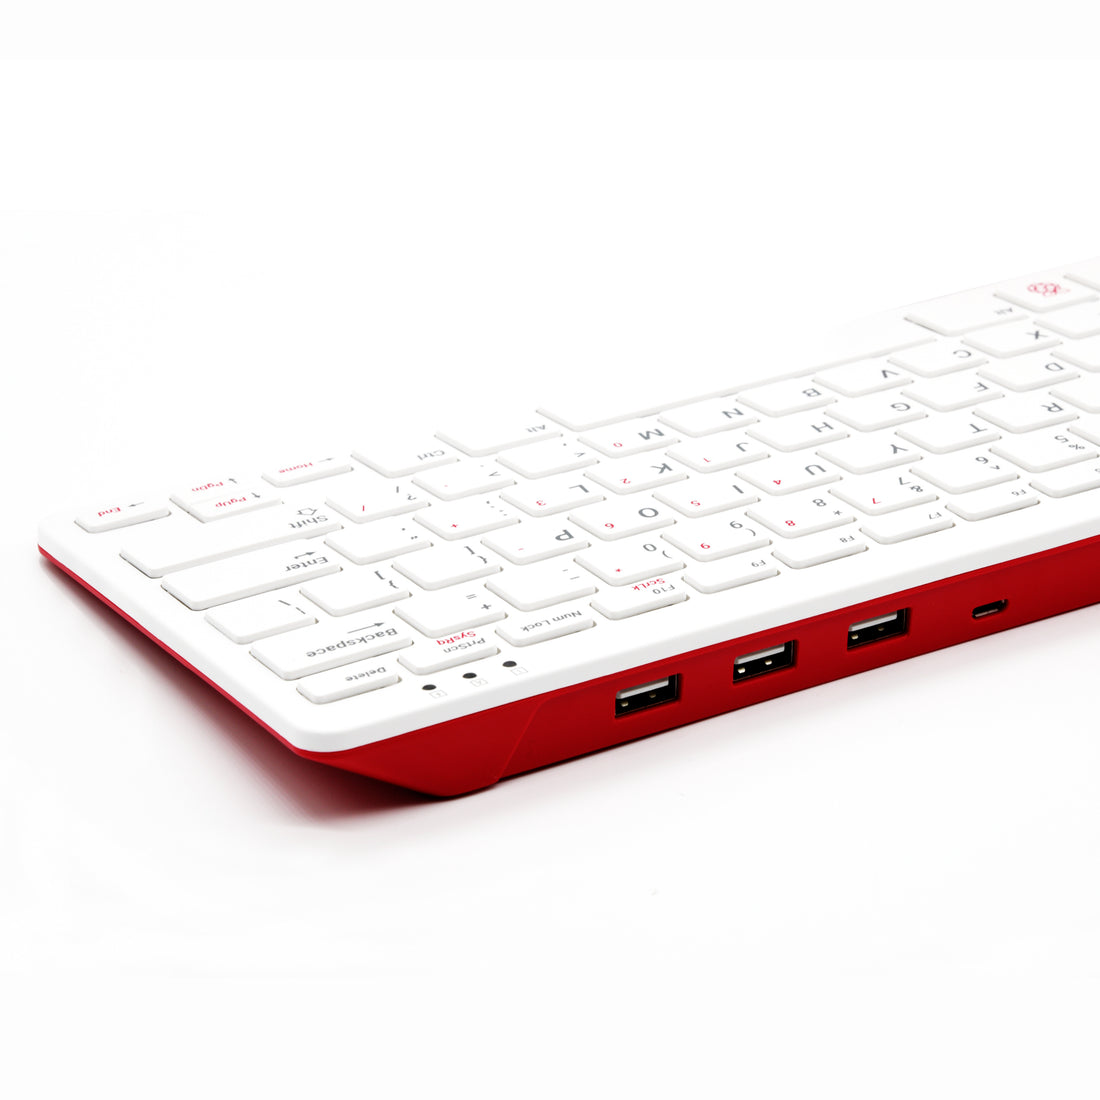 [OPEN BOX] Official Raspberry Pi Keyboard - Red and White (US Layout)